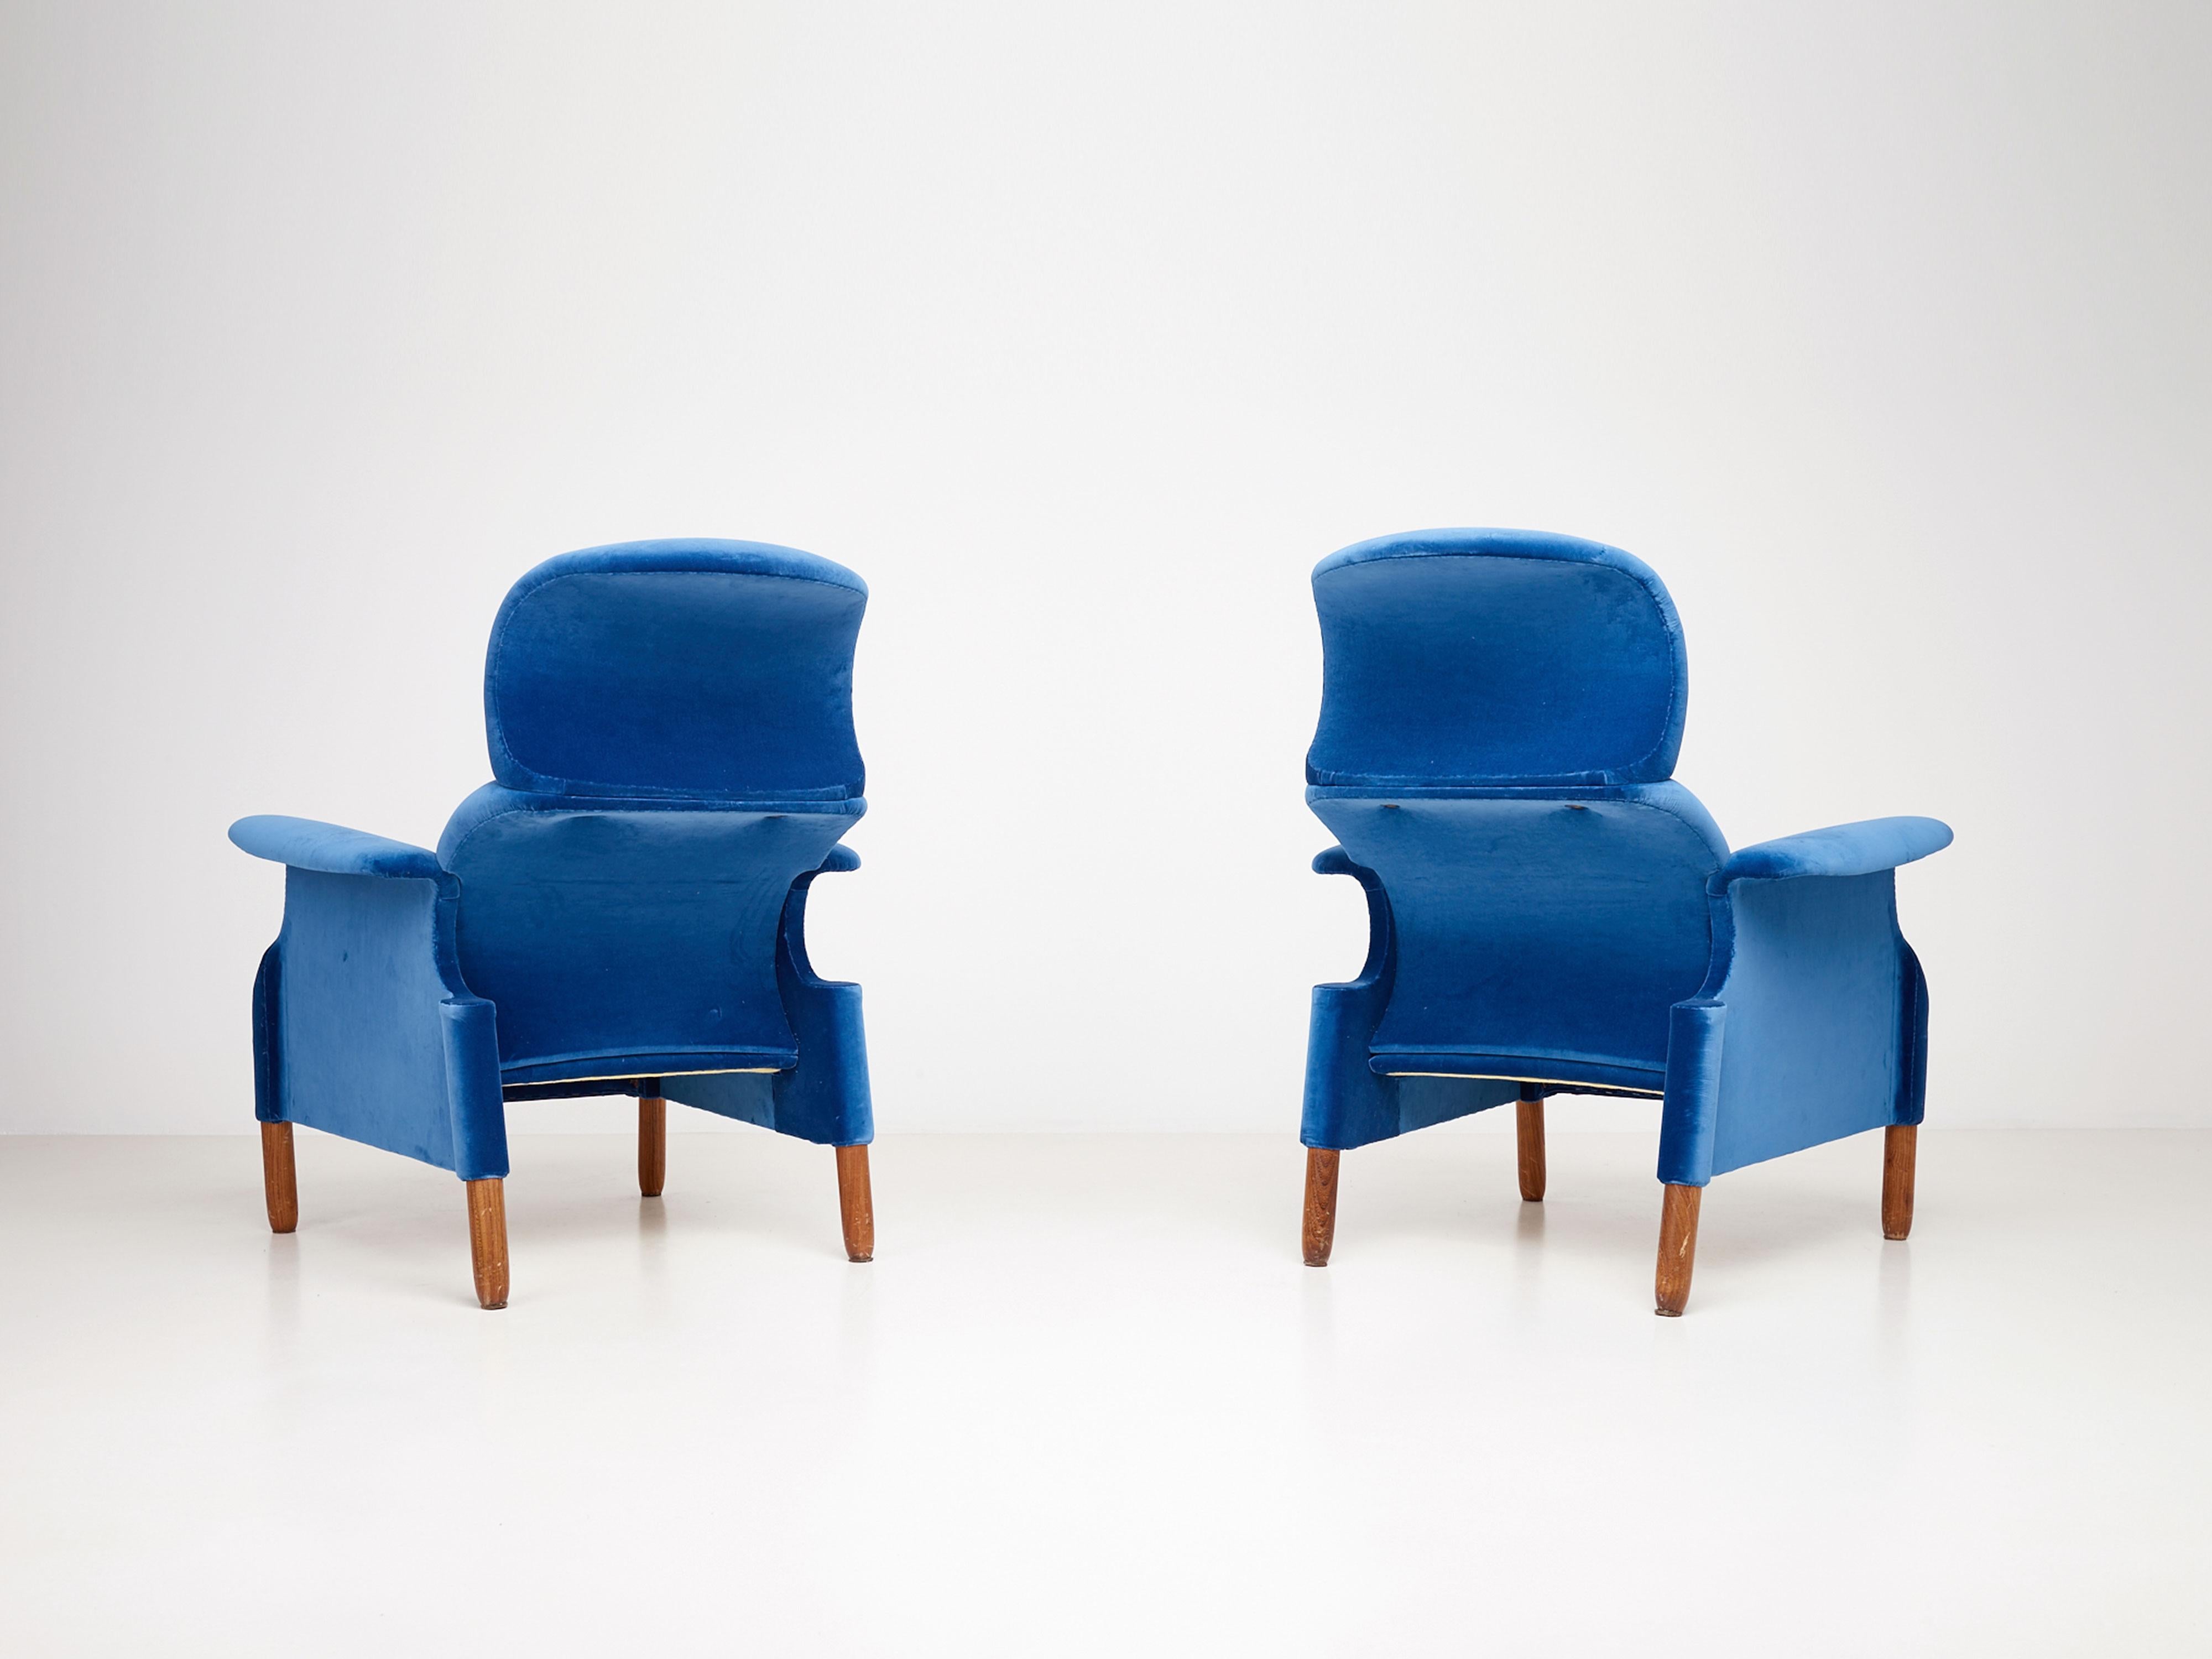 Italian Pair of Sanluca Armchairs by Achille and Pier Giacomo Castiglioni in Blue Velvet